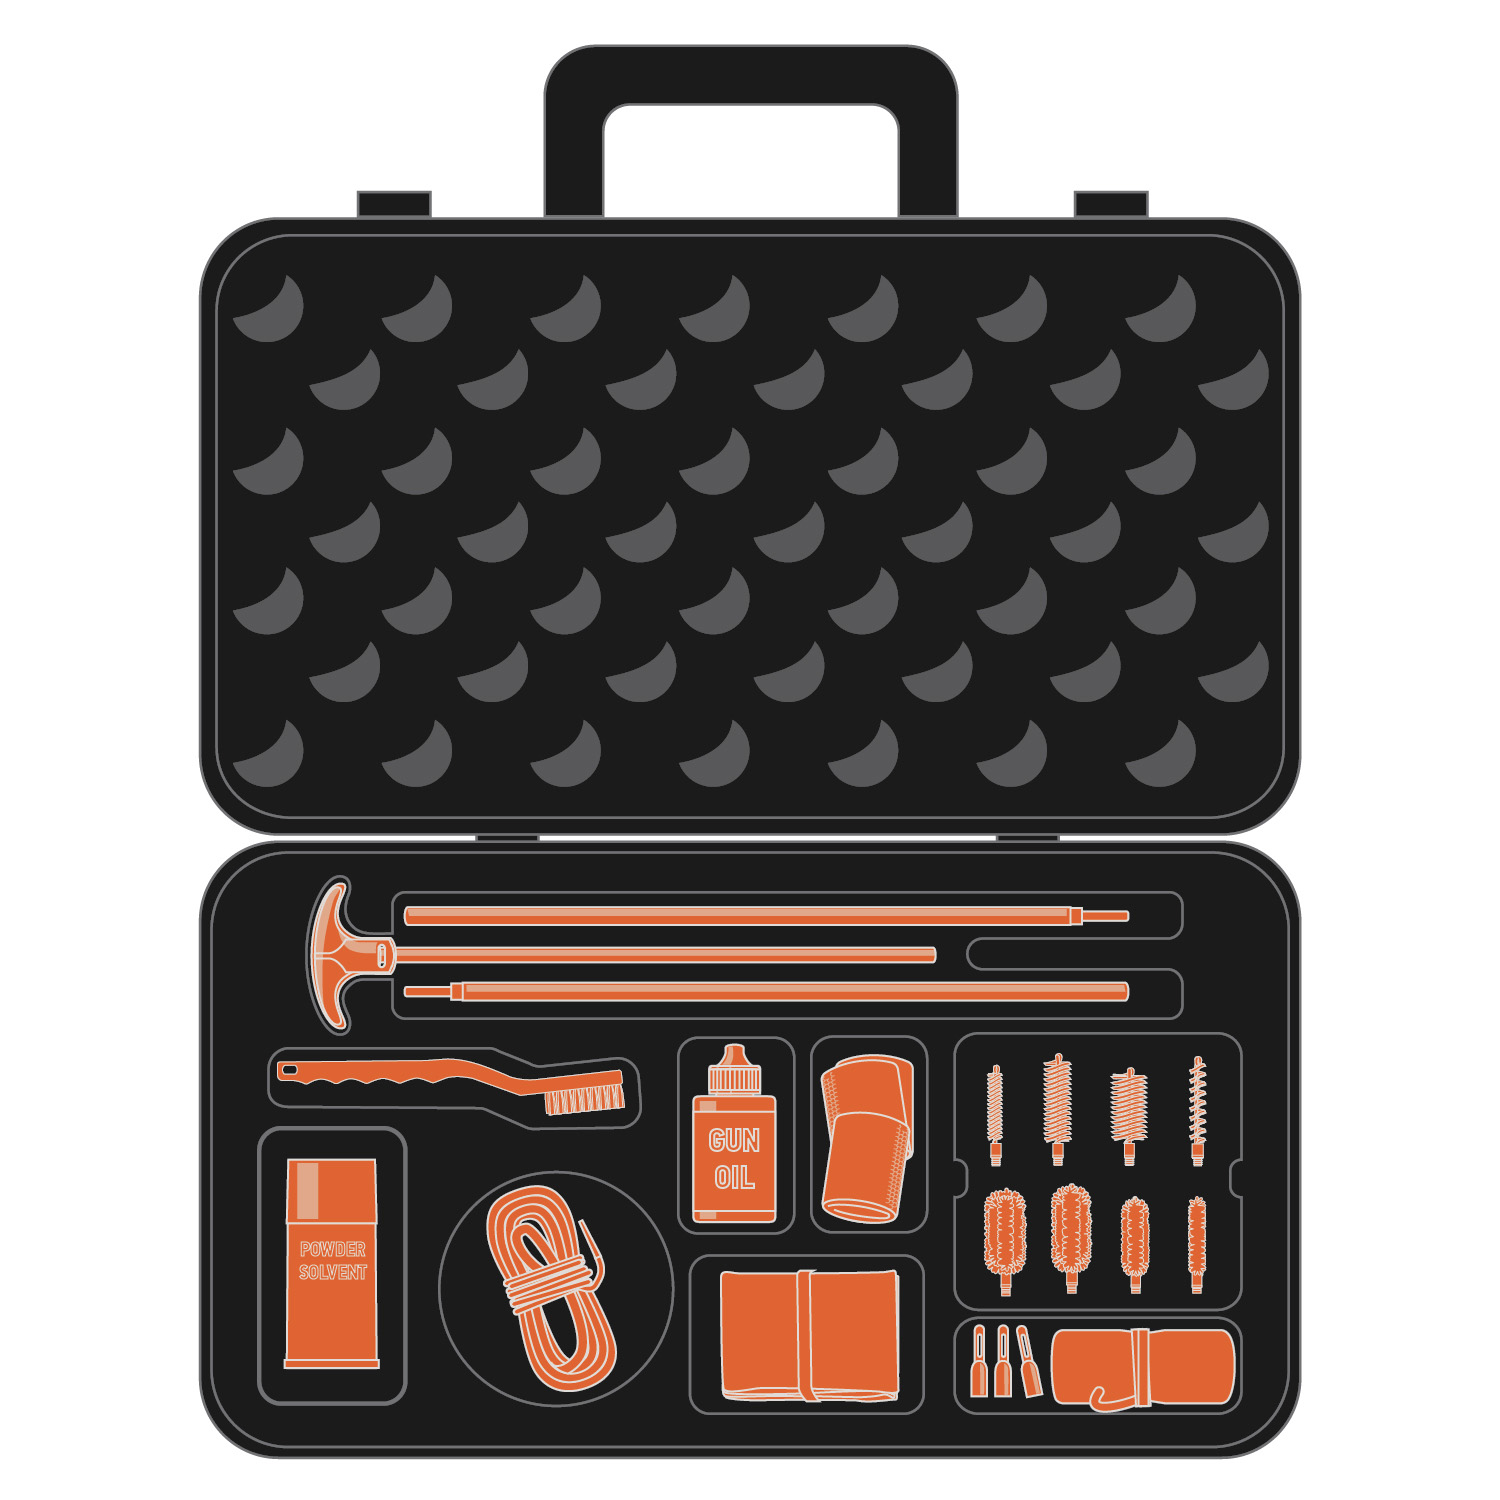 Illustration of a complete cleaning kit with all components highlighted in orange.